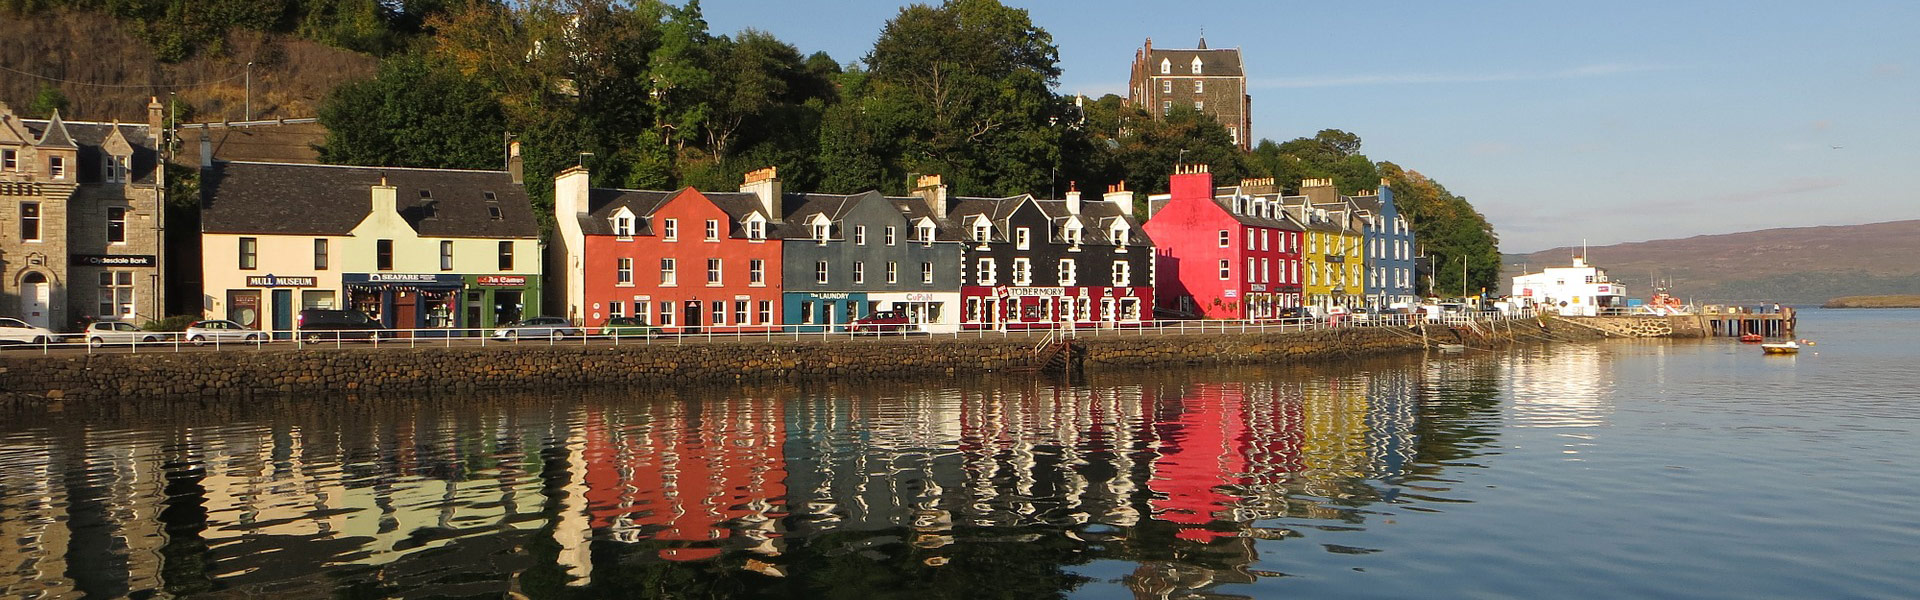 Tobermory on the Isle of Mull